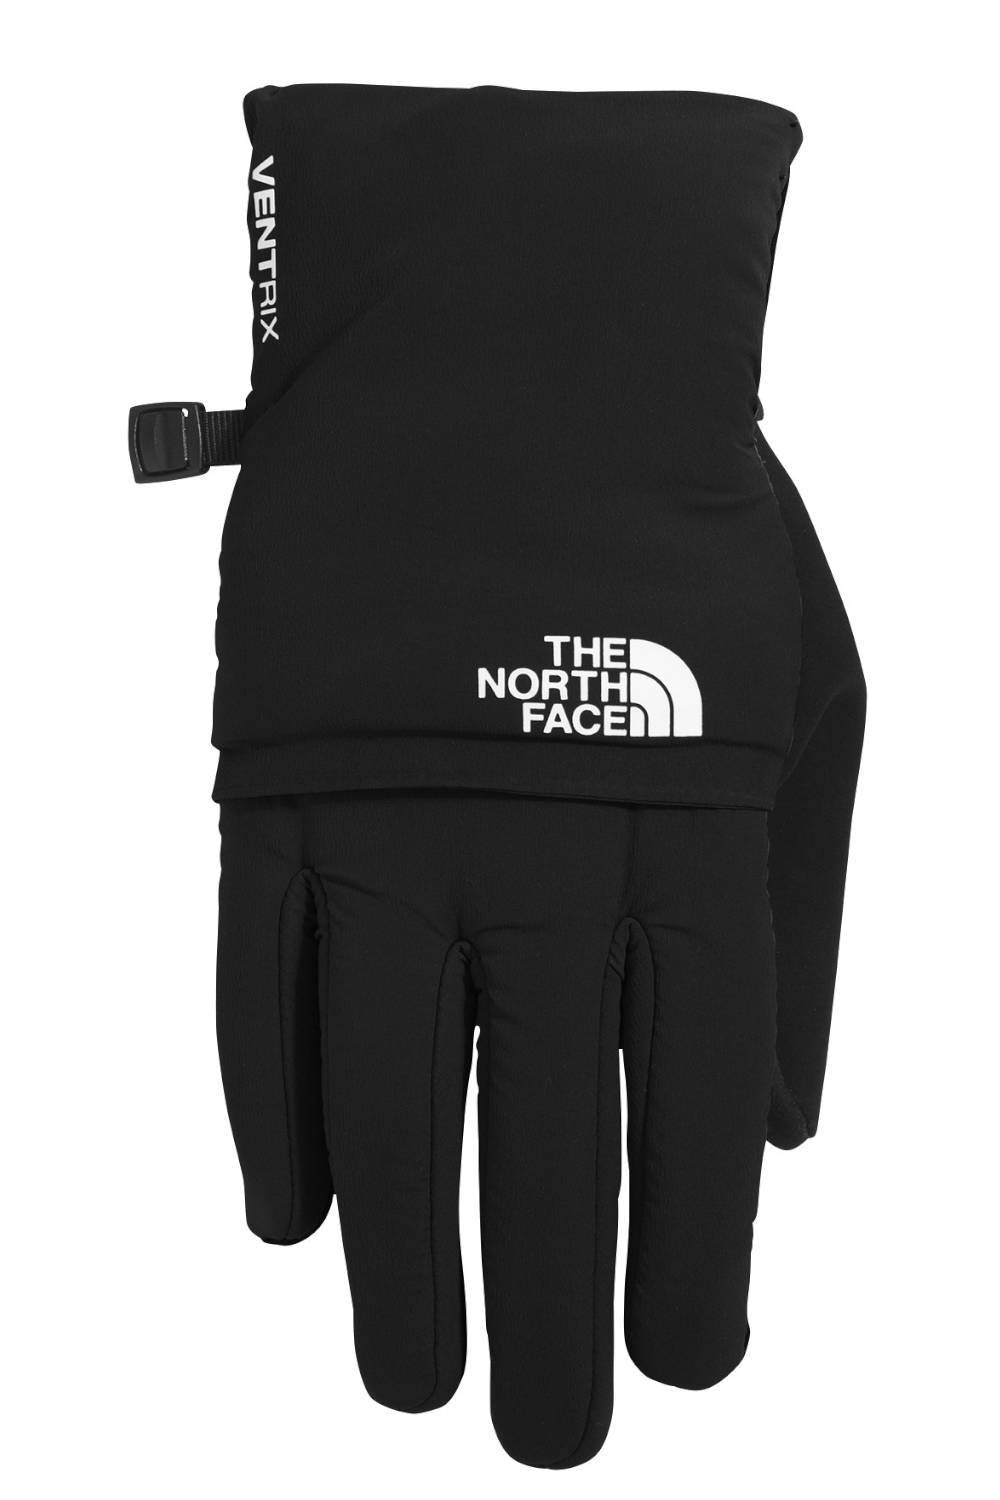 north face recycled gloves